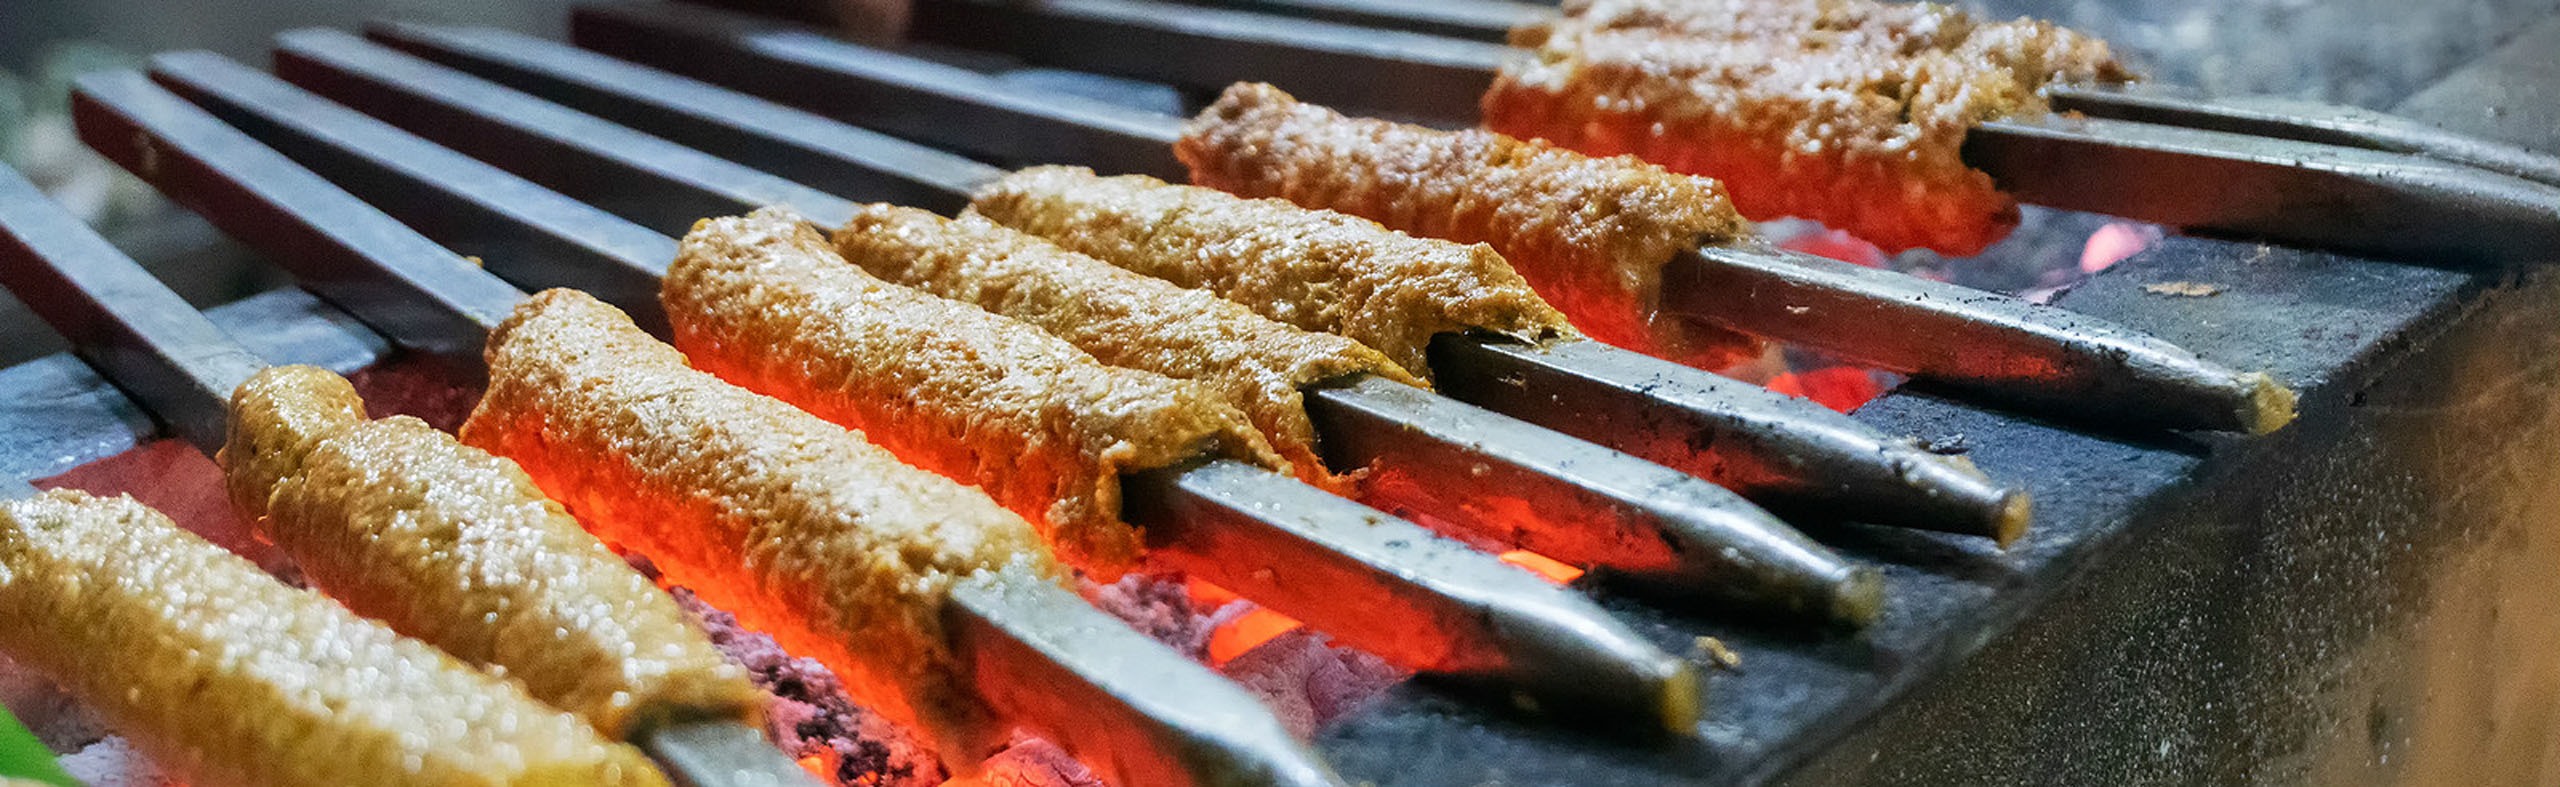 Street Food in India 